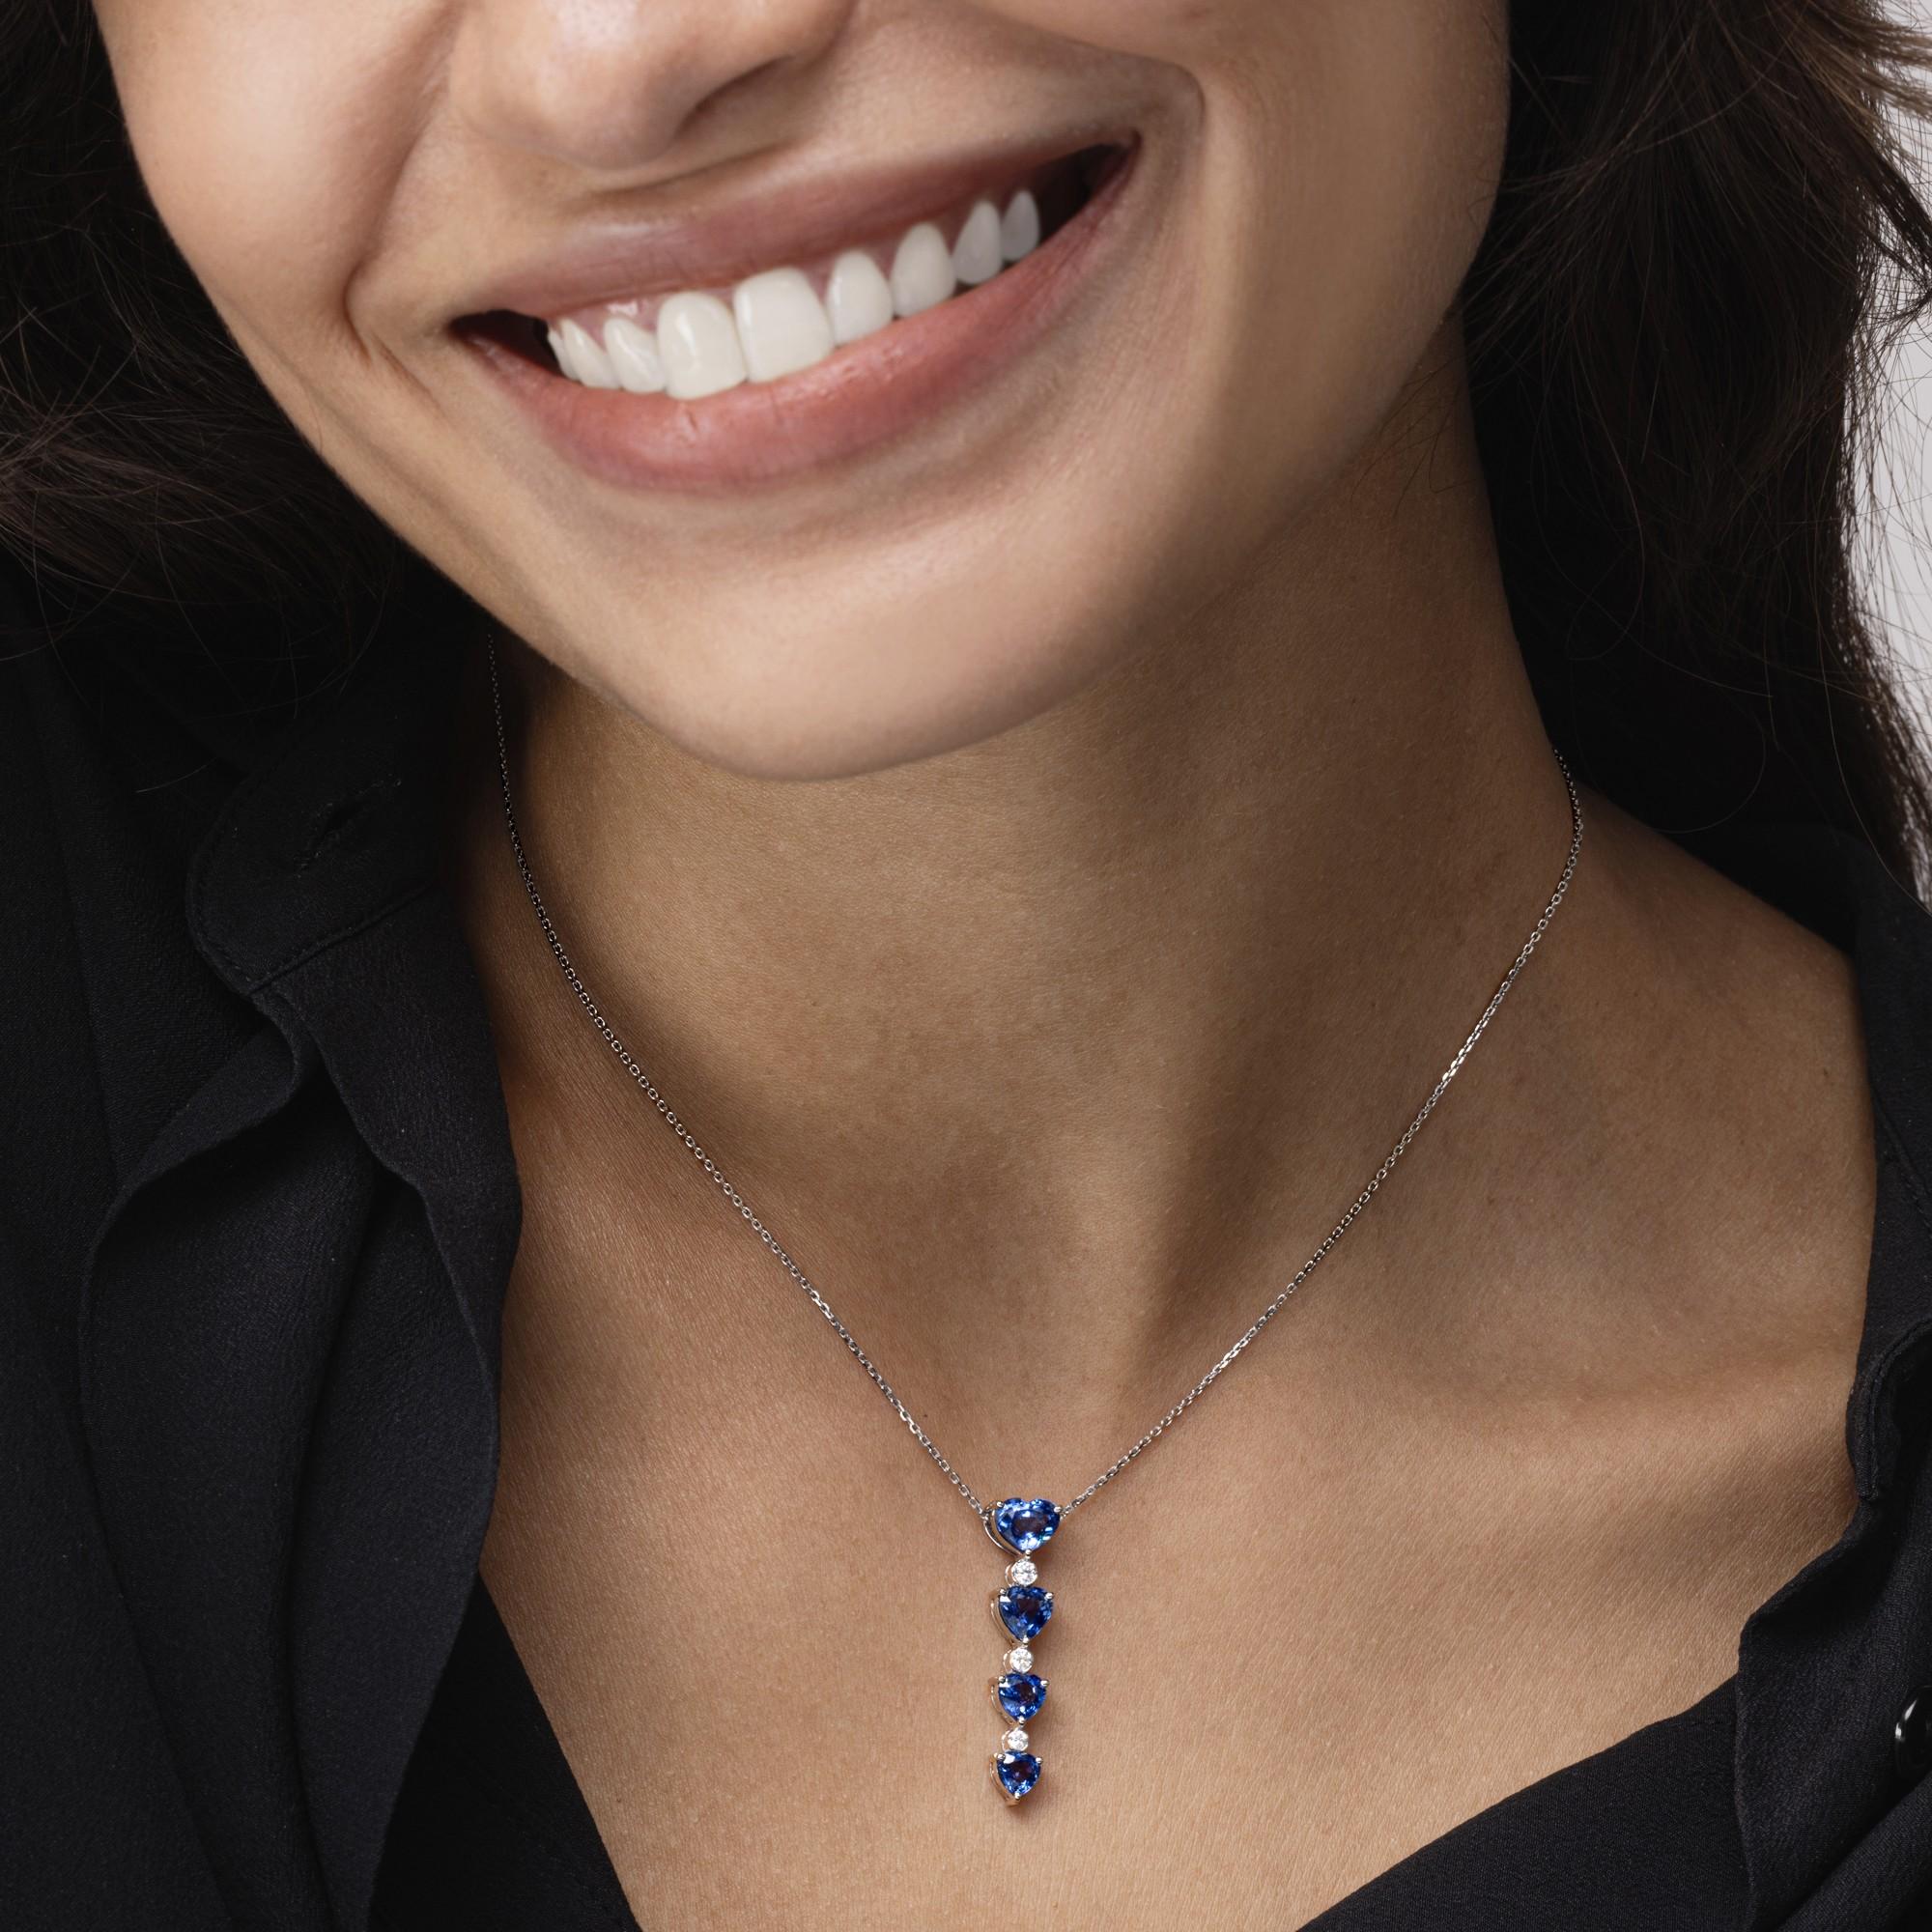 Alex Jona design collection, hand crafted in Italy, 18 karat white gold pendant necklace, 16.5 inch long, suspending four heart cut blue sapphires, weighing 3.31 carats in total alternated by 0.13 carats of white diamonds, F-G color, VS